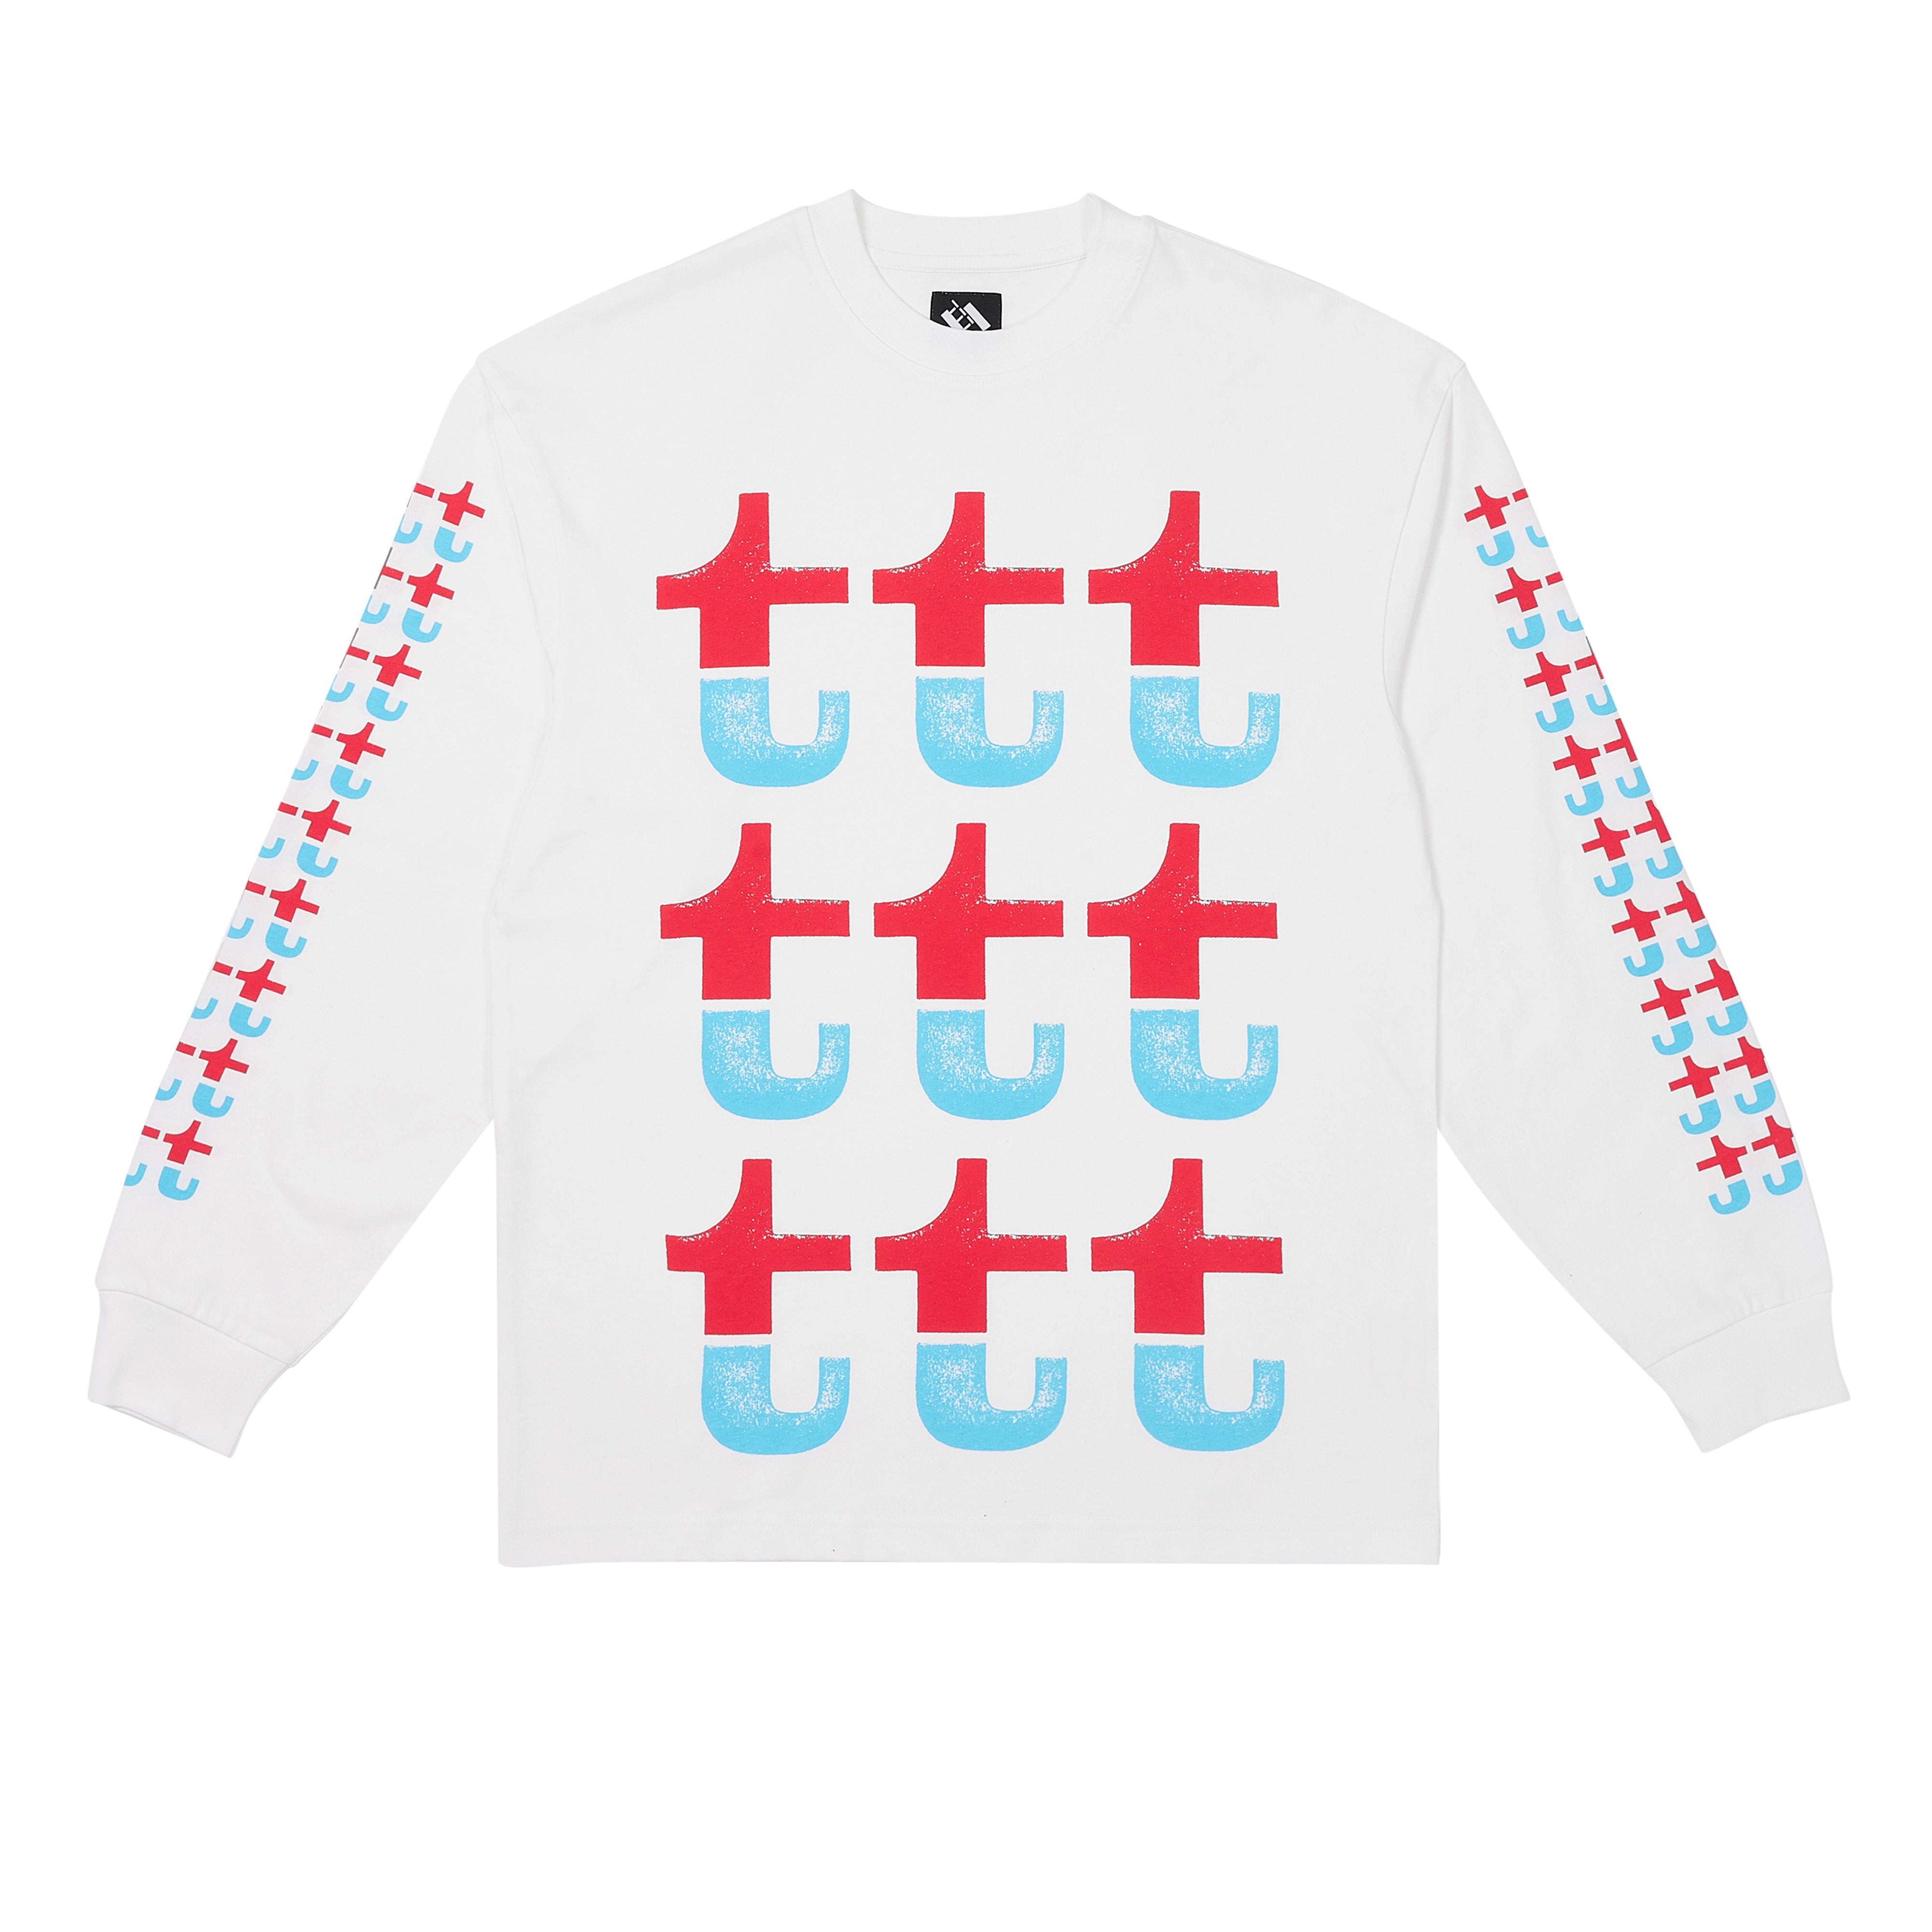 The Trilogy Tapes - Men's Red And Blue Split Longsleeve - (White